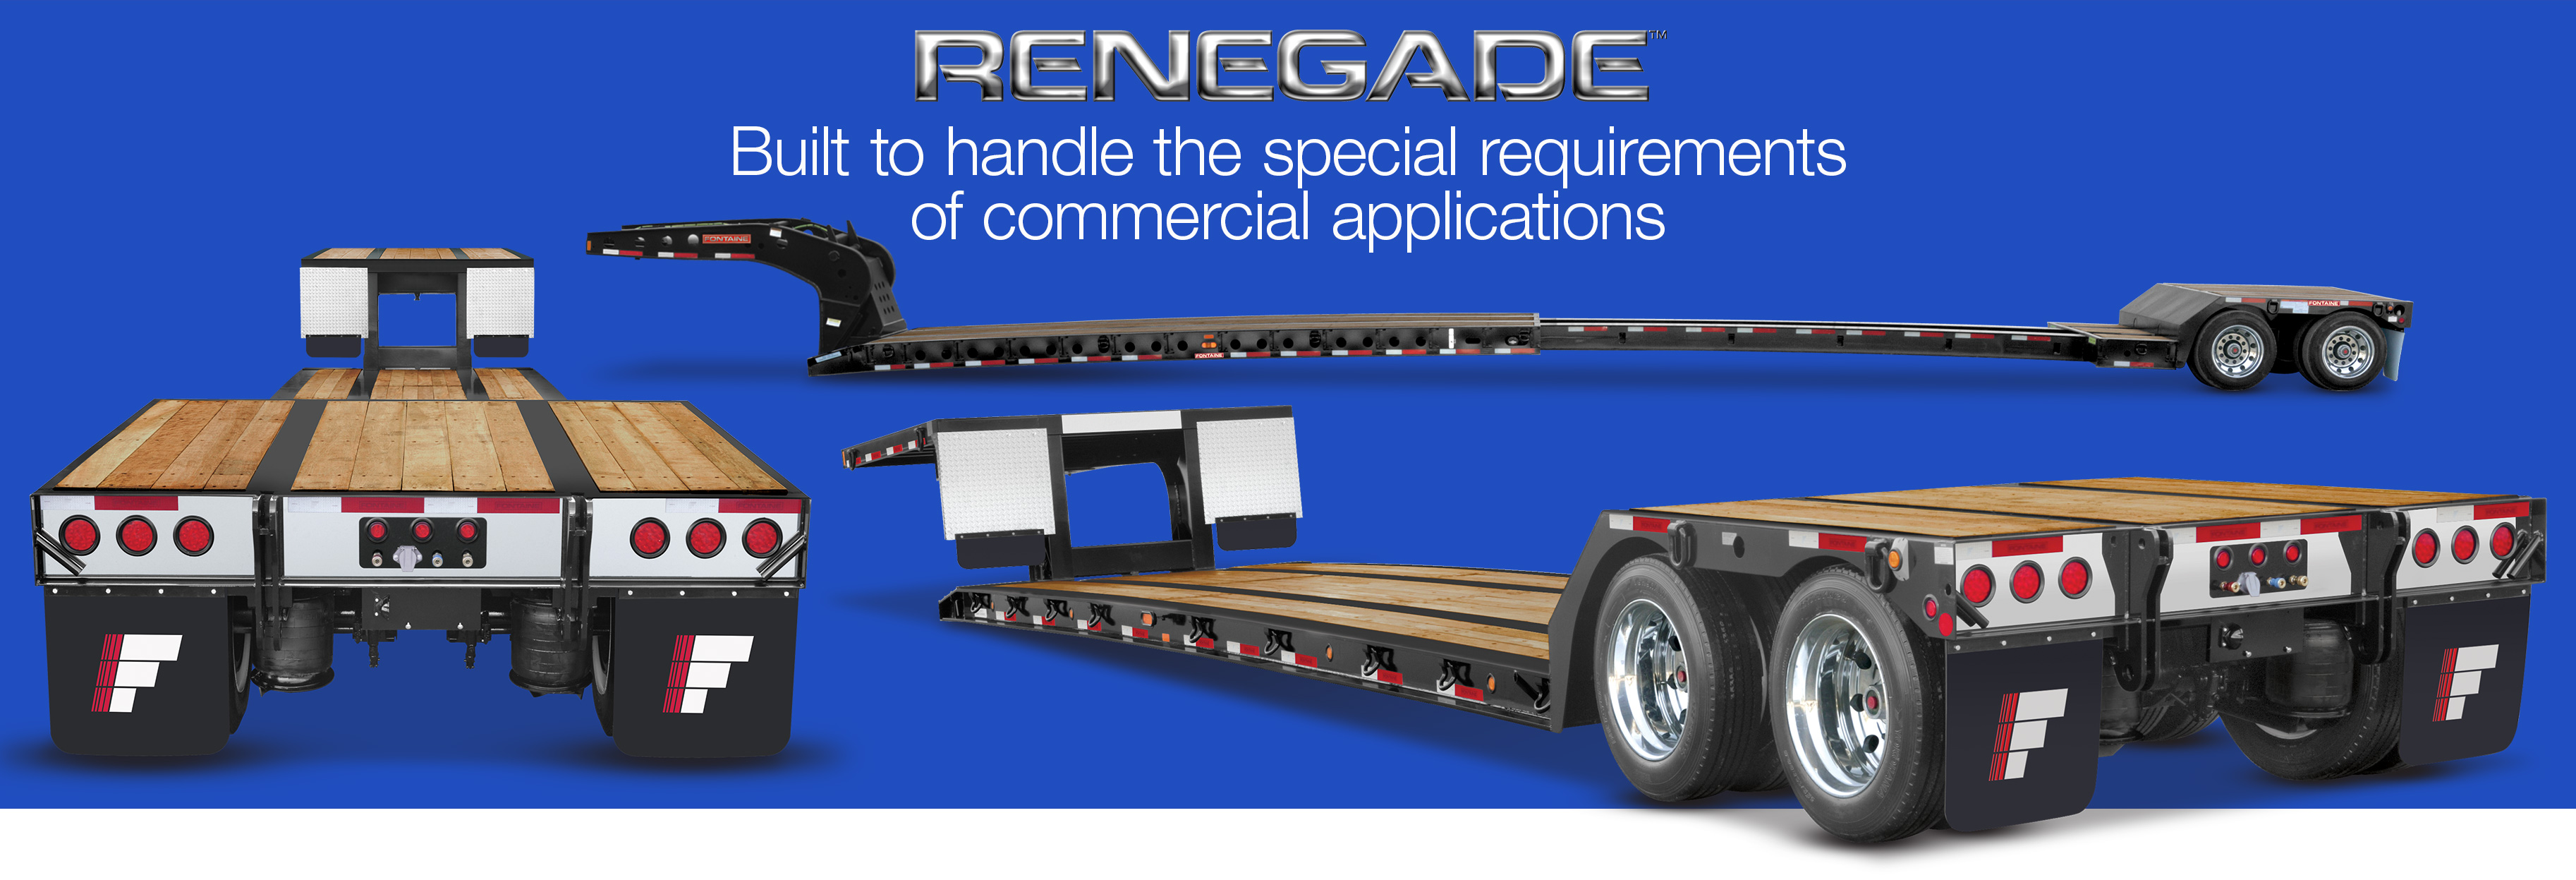 Renegade lowbed trailers manufactured by Fontaine Heavy Haul